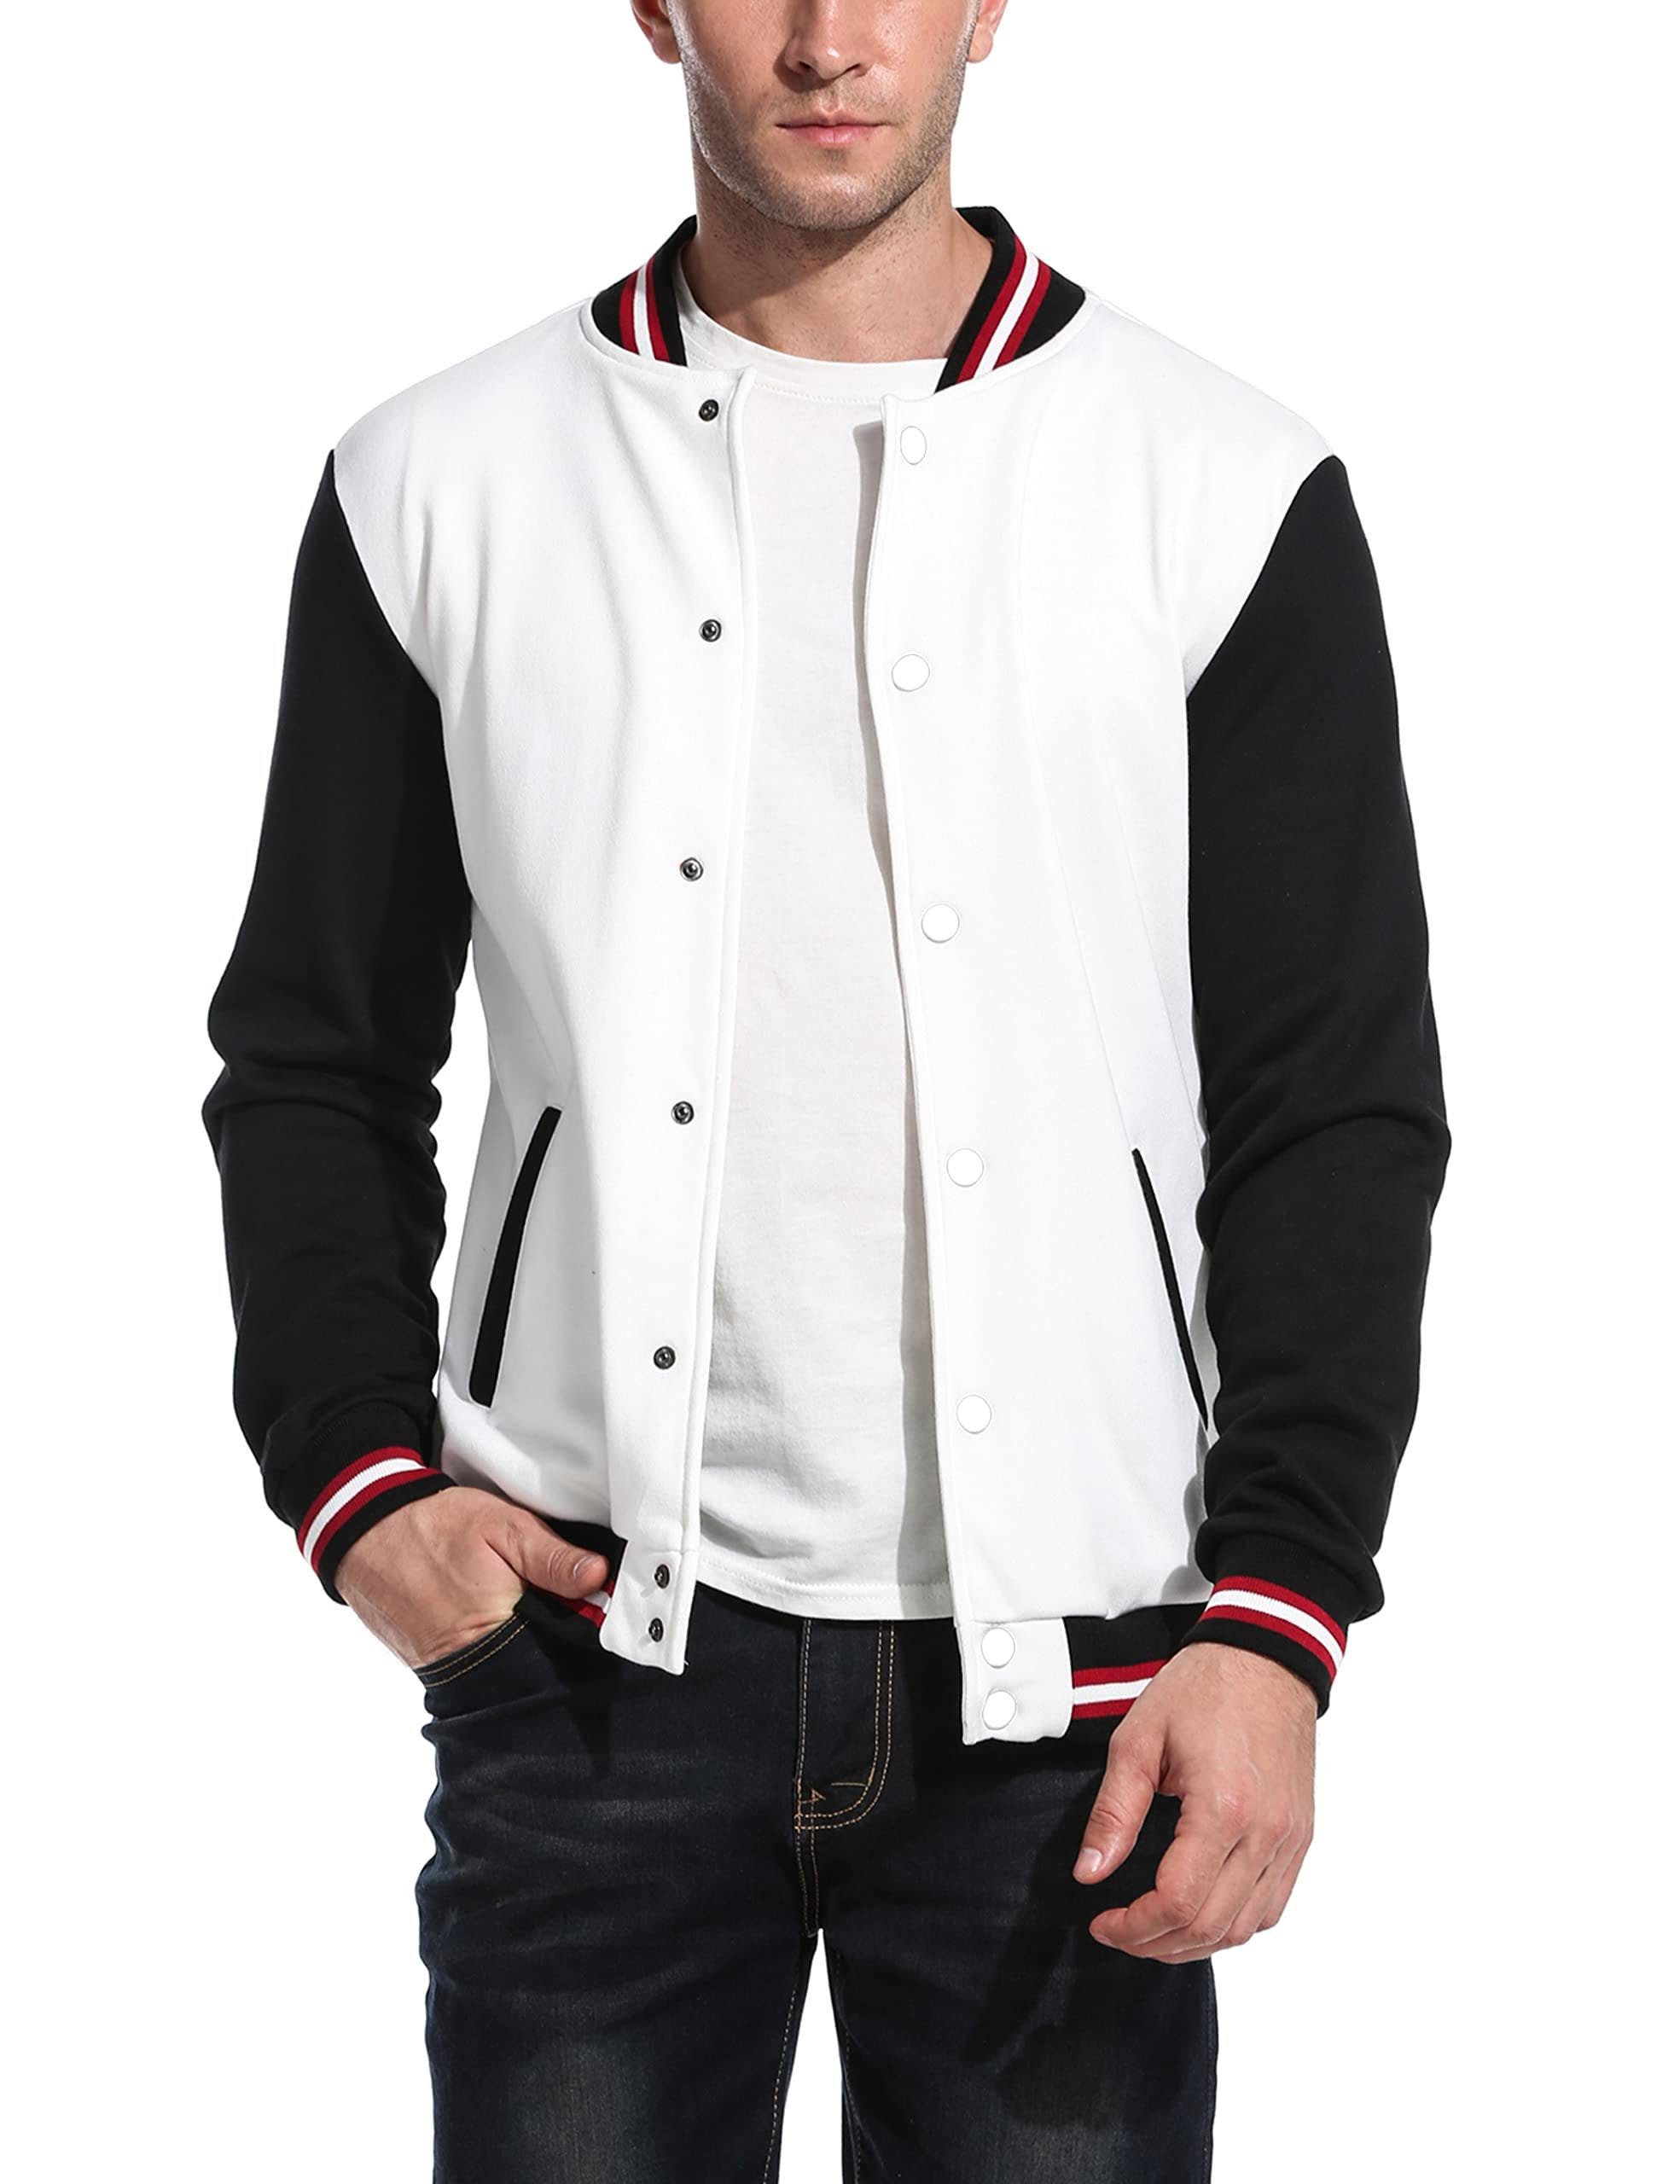 Unisex Slim Fit Letterman Jacket for Casual Style | Image